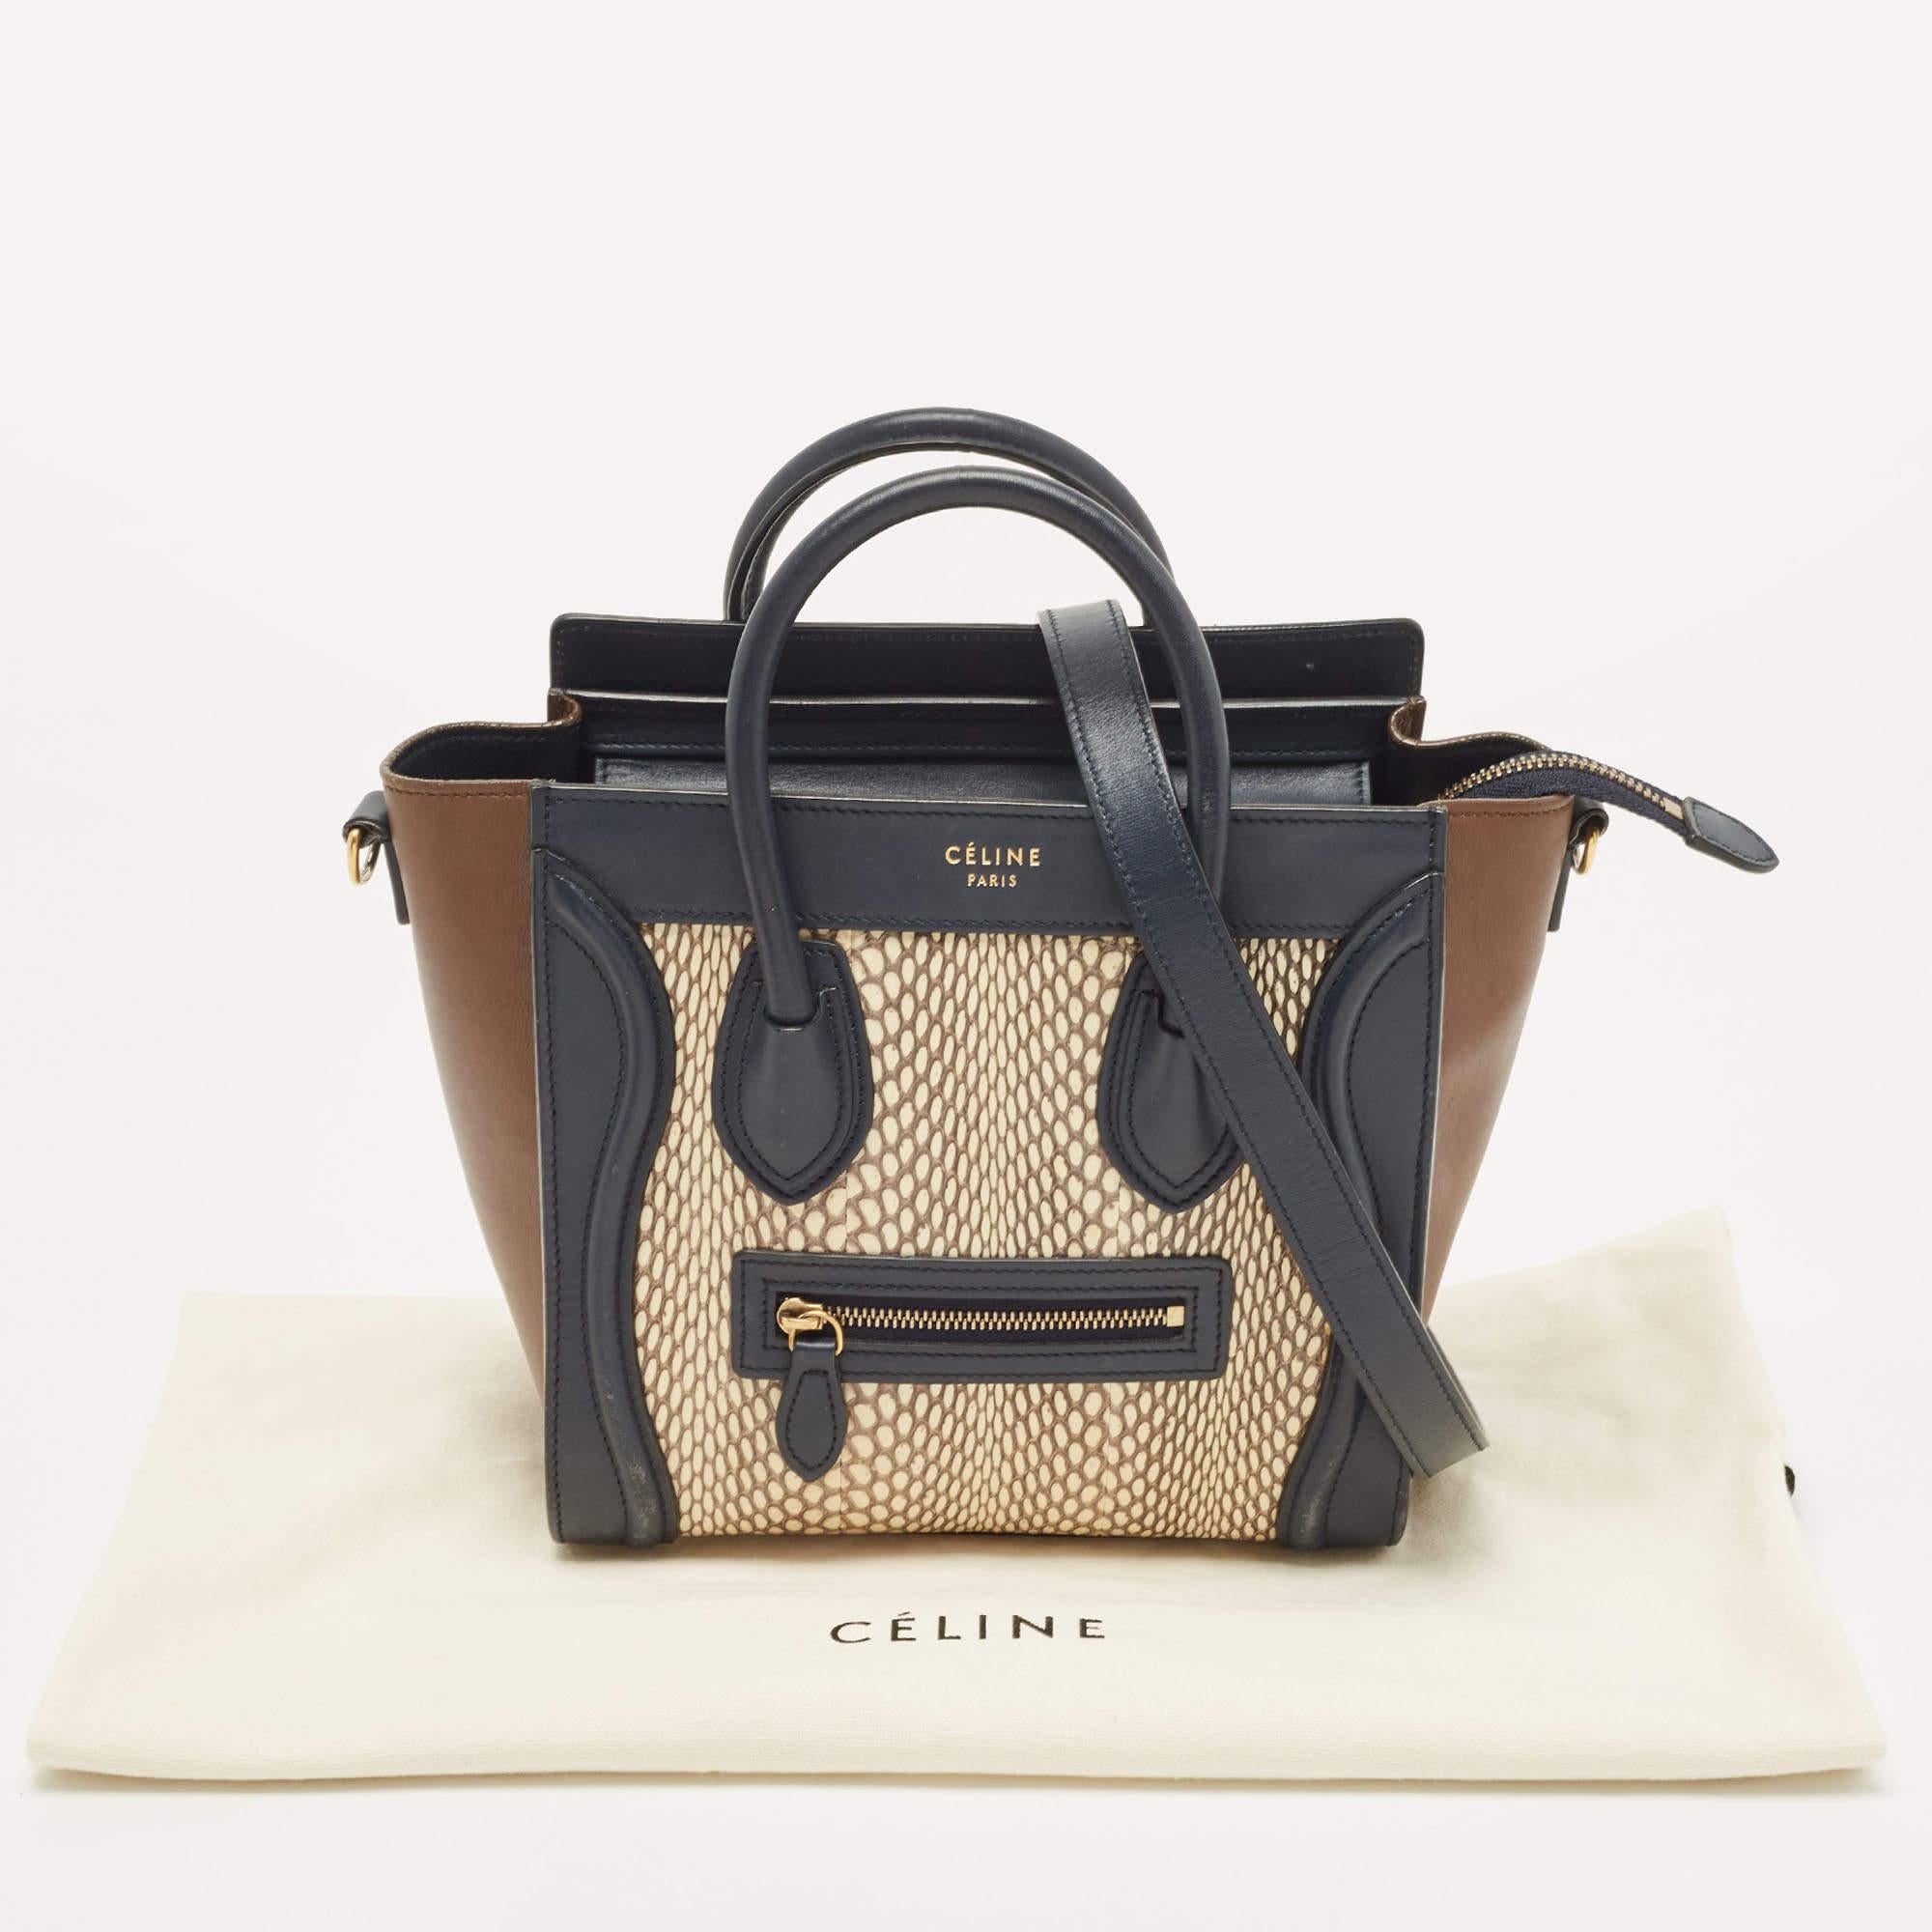 Celine Tricolor Leather and Watersnake Nano Luggage Tote 14